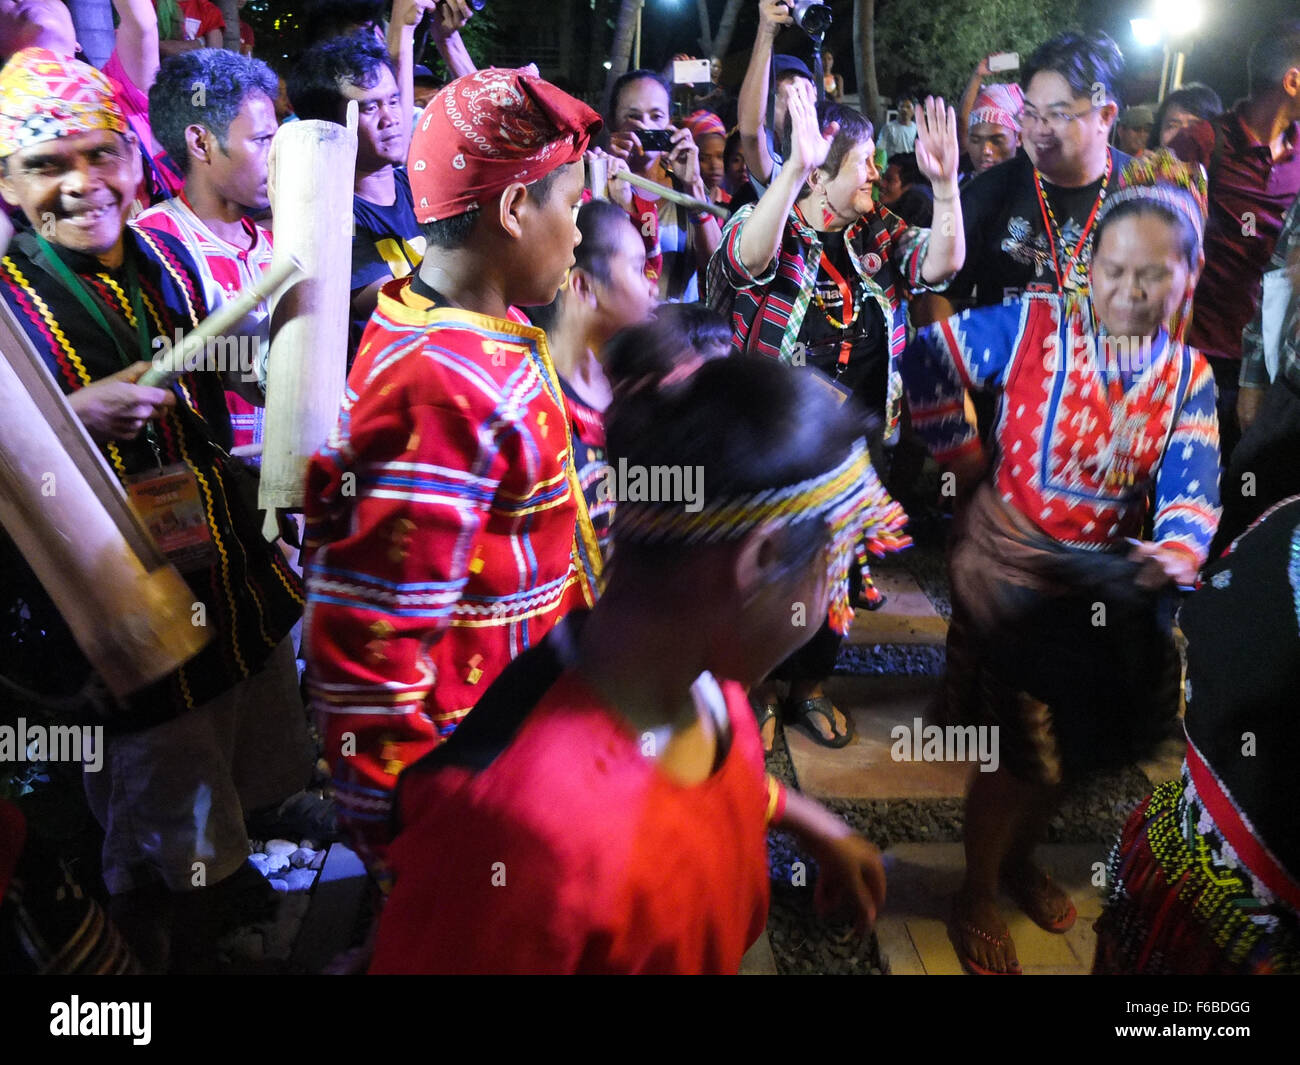 Lumad people dance with joy during the arrival of the foreign delegates. The Lumad peoples are a group of indigenous people of the southern Philippines. It is a Cebuano term meaning 'native' or 'indigenous'. The term is short for Katawhang Lumad (literally 'indigenous peoples'), the autonym officially adopted by the delegates of the Lumad Mindanao Peoples Federation (LMPF) founding assembly on 26 June 1986 at the Guadalupe Formation Center, Balindog, Kidapawan, Cotabato, Philippines. It is the self-ascription and collective identity of the indigenous peoples of Mindanao. (Photo by Josefiel Riv Stock Photo